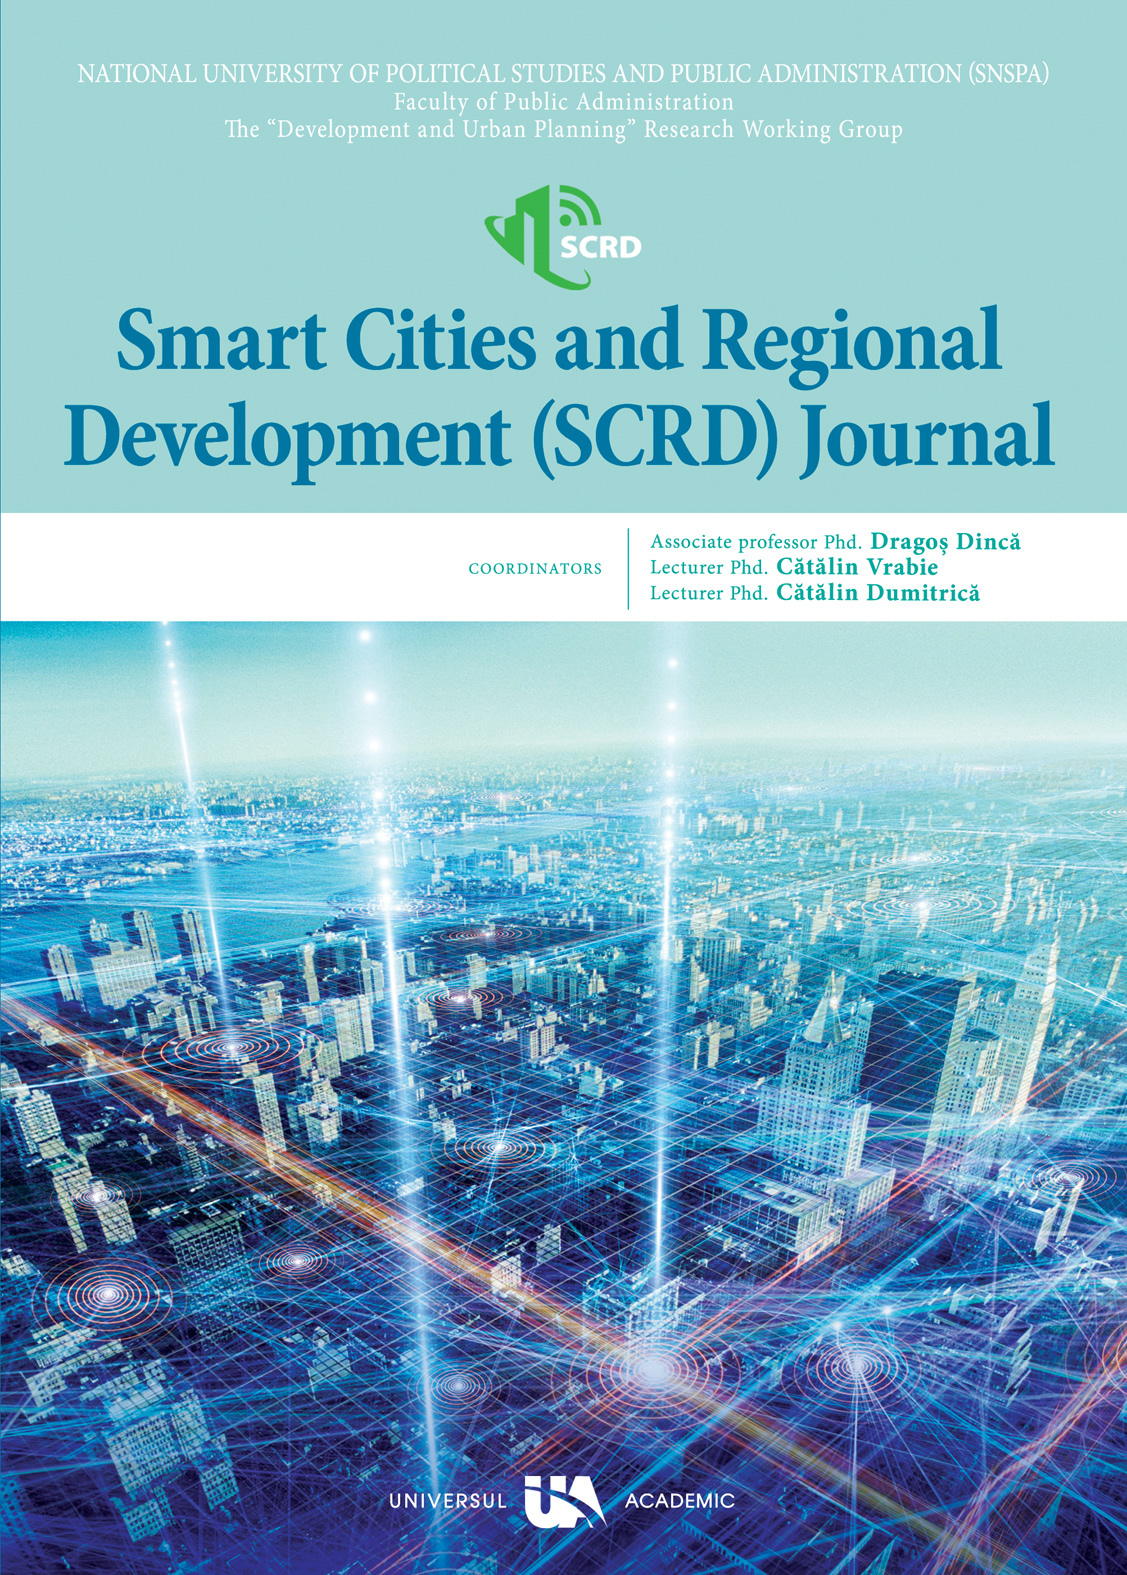 Smart City - A new concept of green and technological city